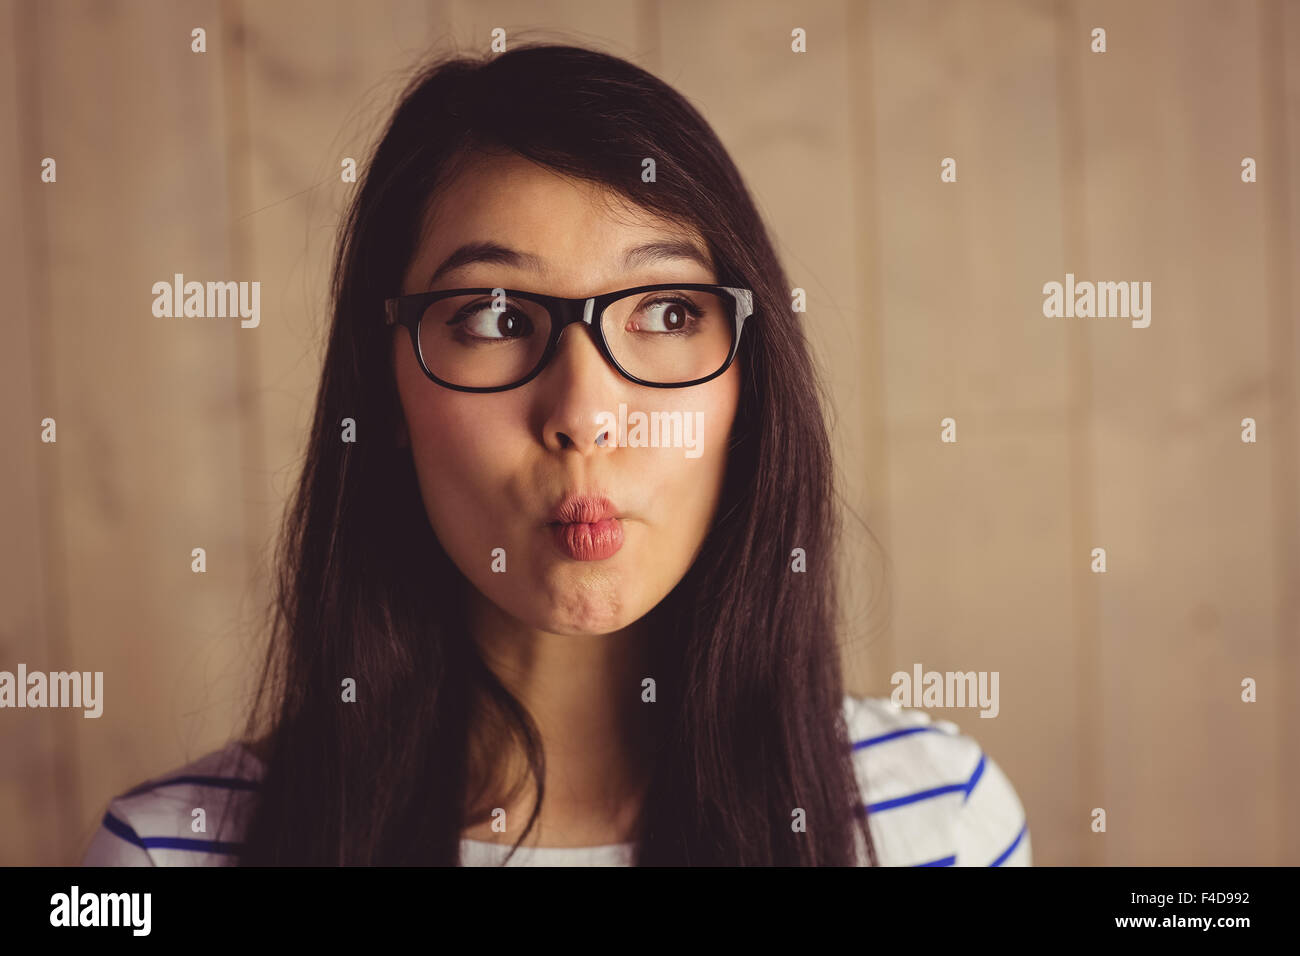 Young attractive woman grimacing for camera Stock Photo